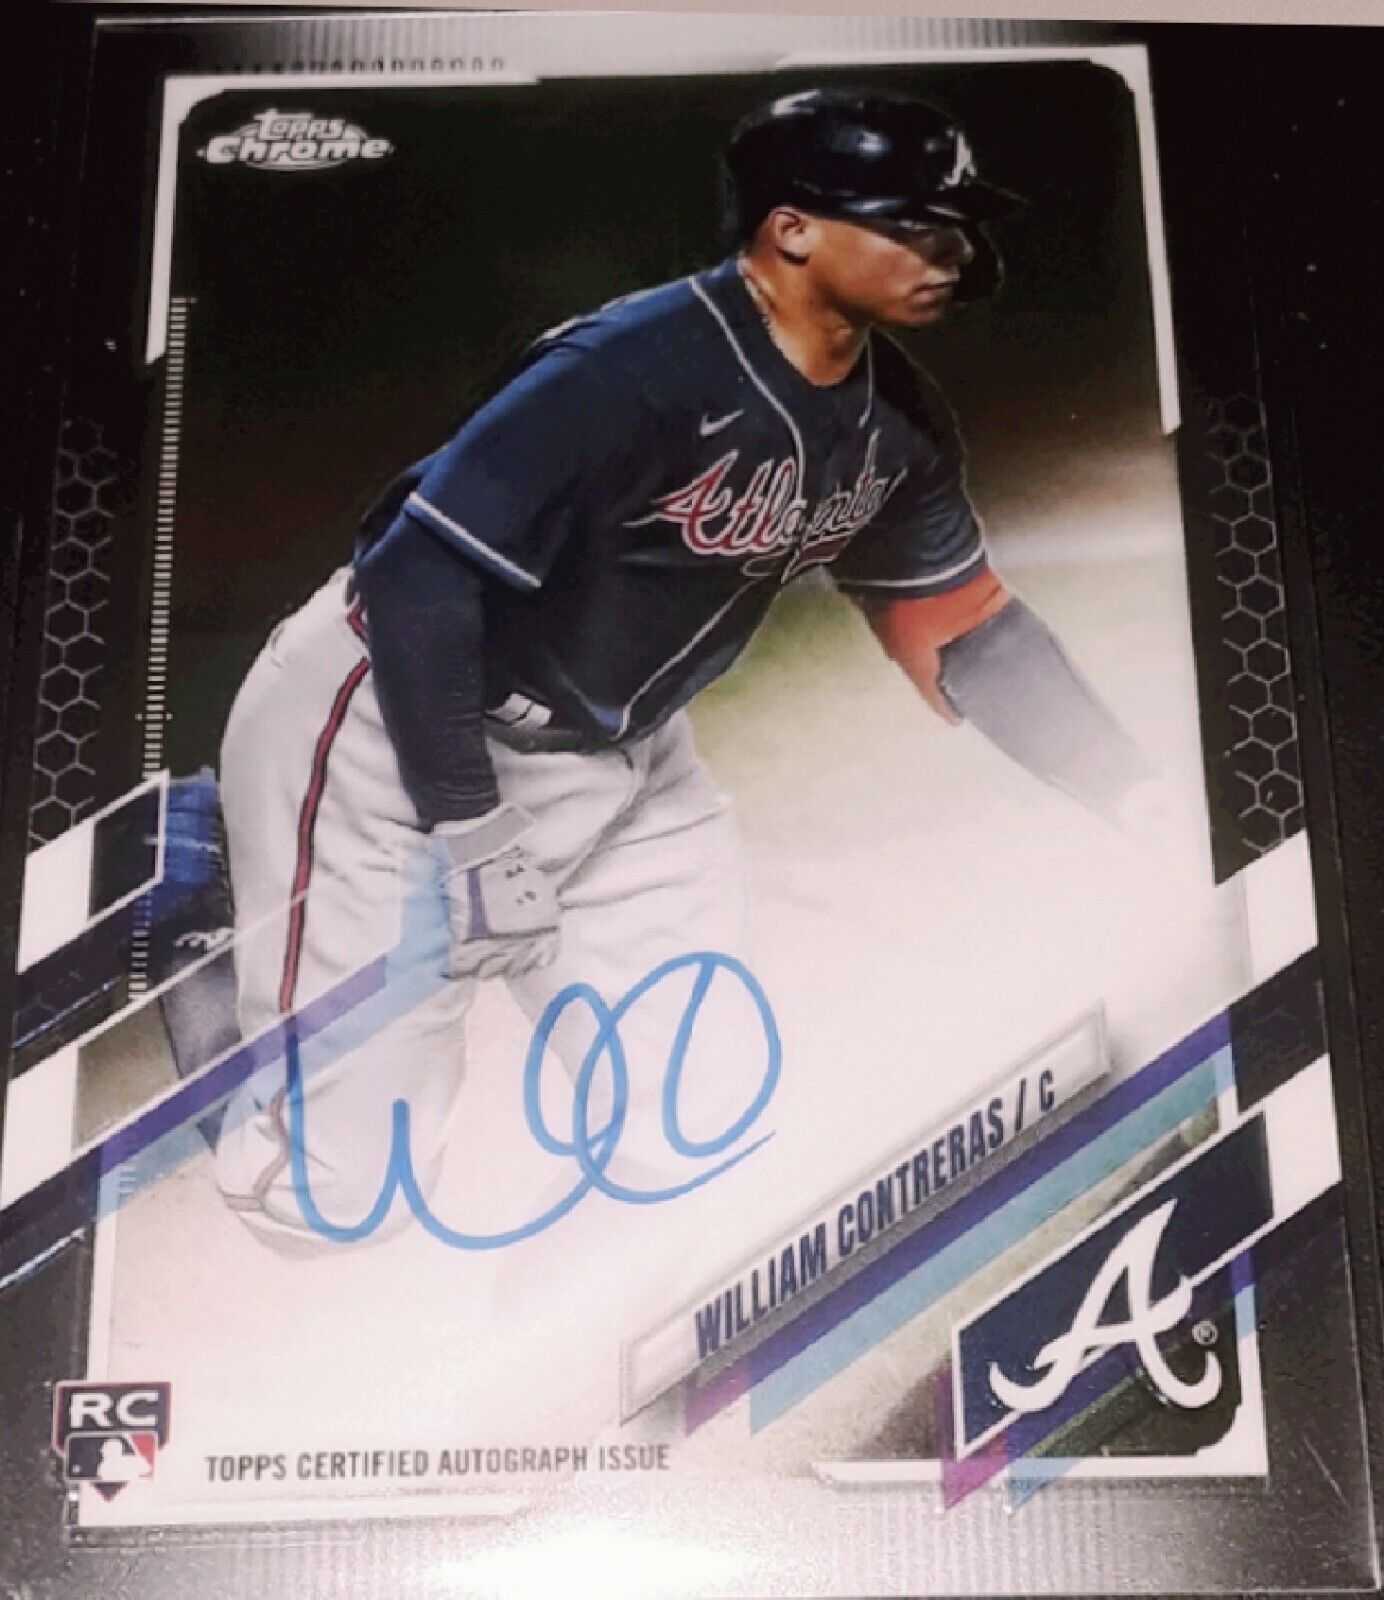 2021 TOPPS CHROME ROOKIE AUTOGRAPHS #RAWC WILLIAM CONTRERAS *HARD SIGNED*